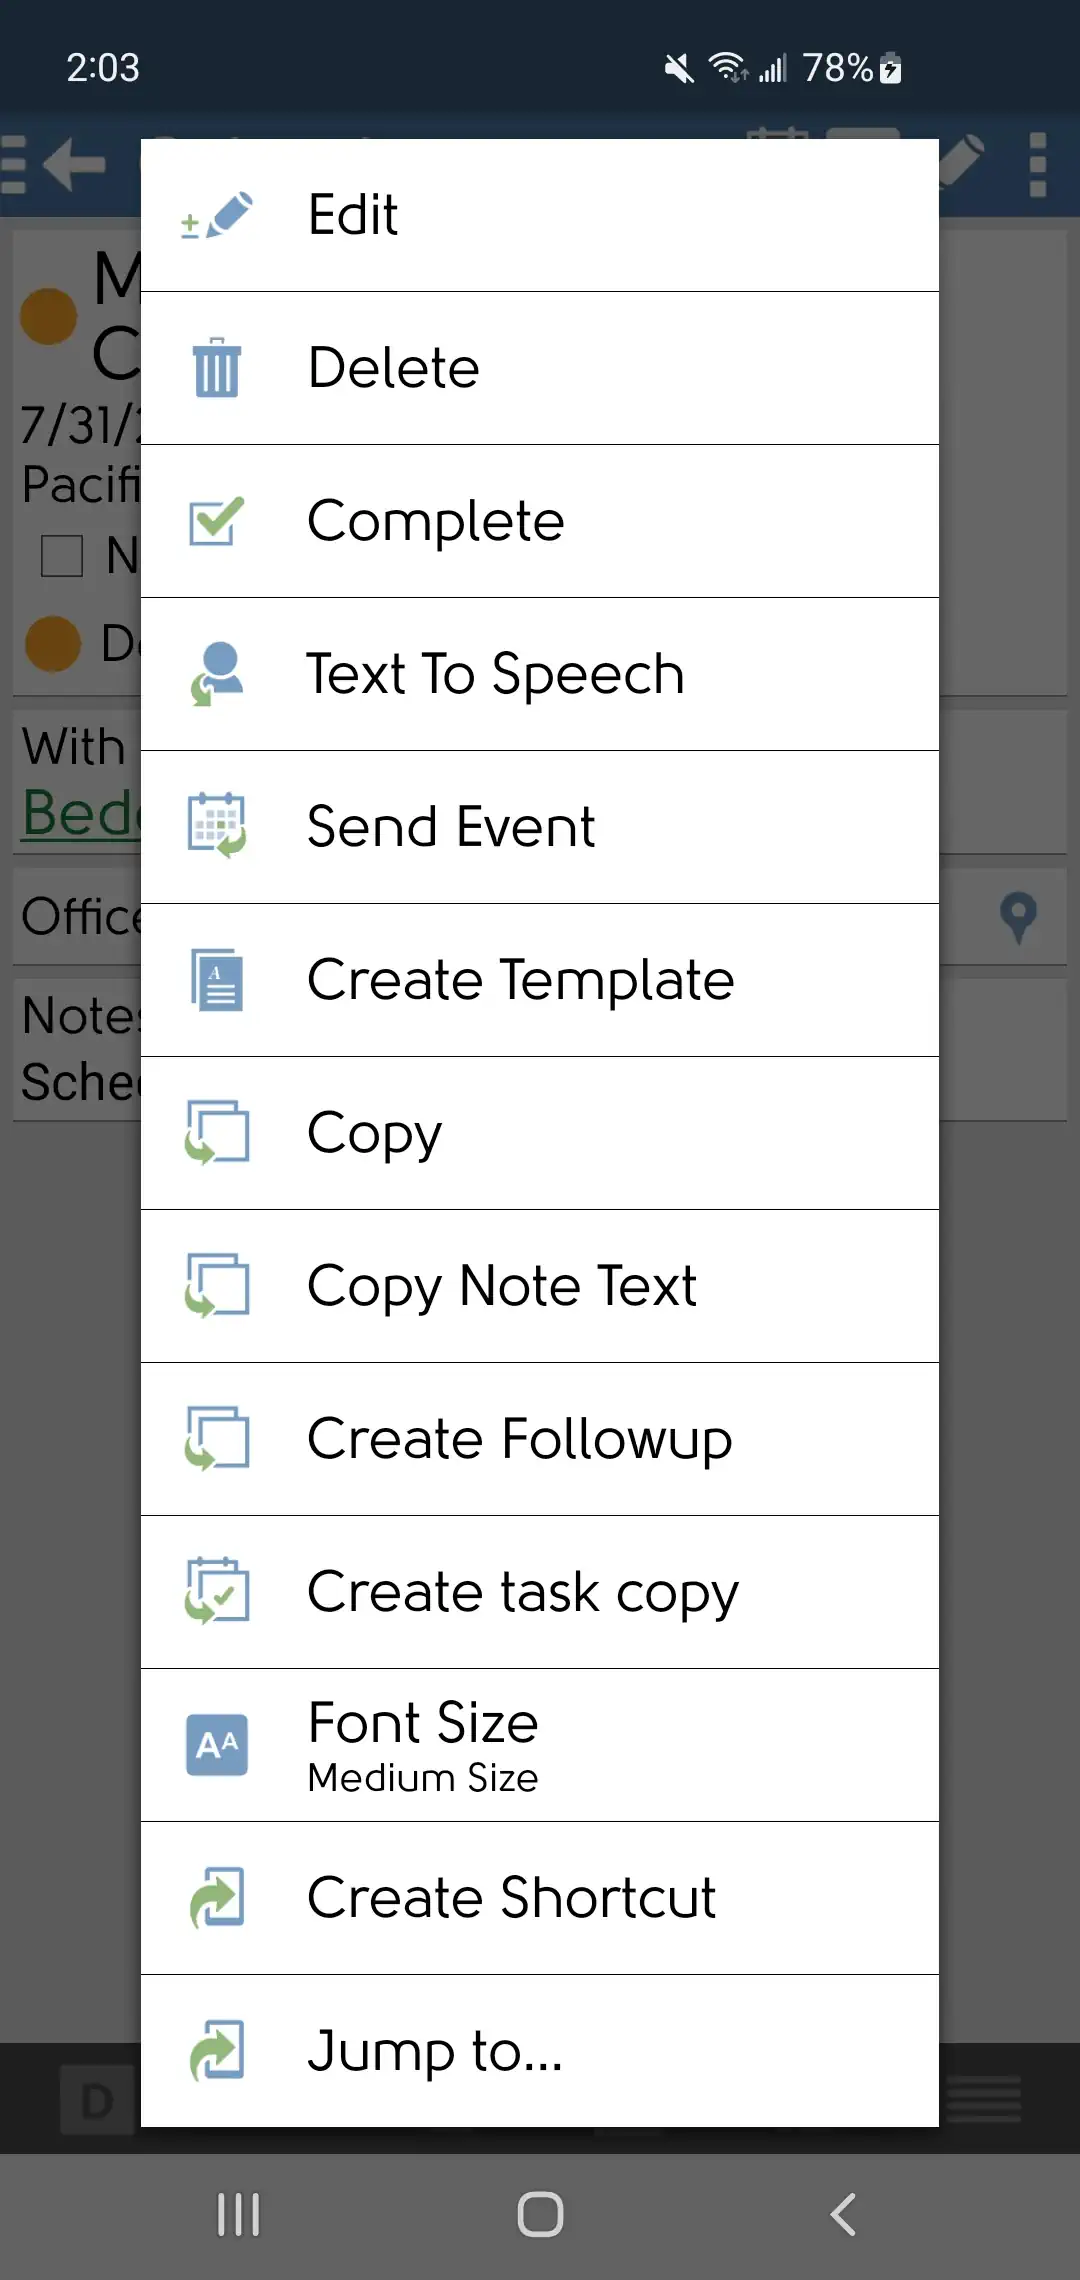 DejaOffice Menu with Create Template from Existing Record Option